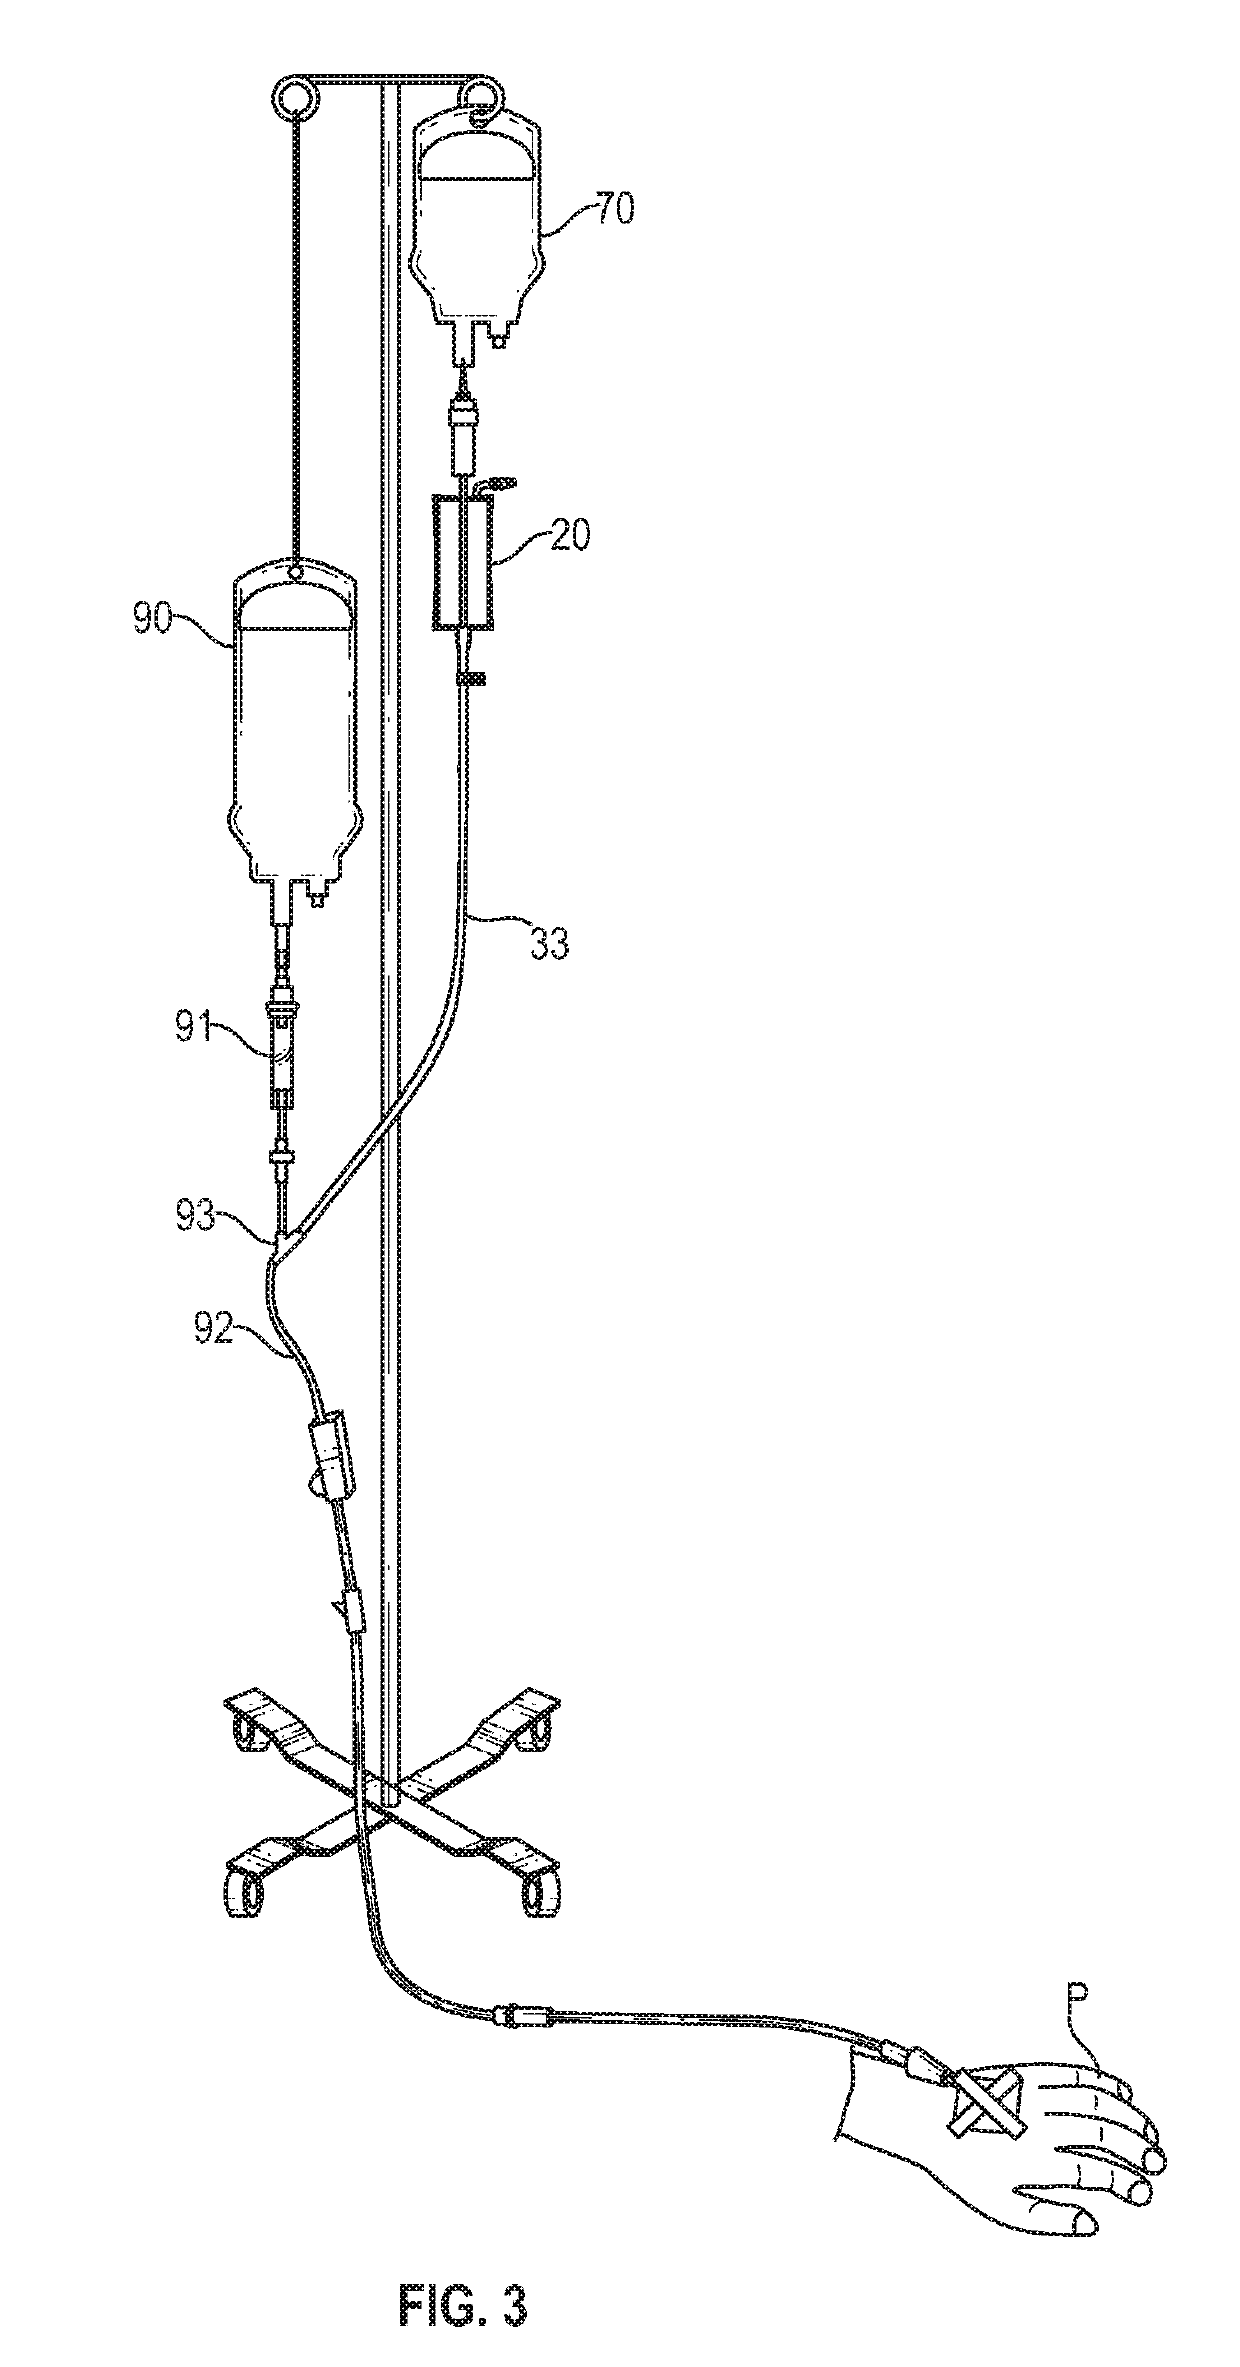 Device for Thorough Delivery of Intravenous Medicine